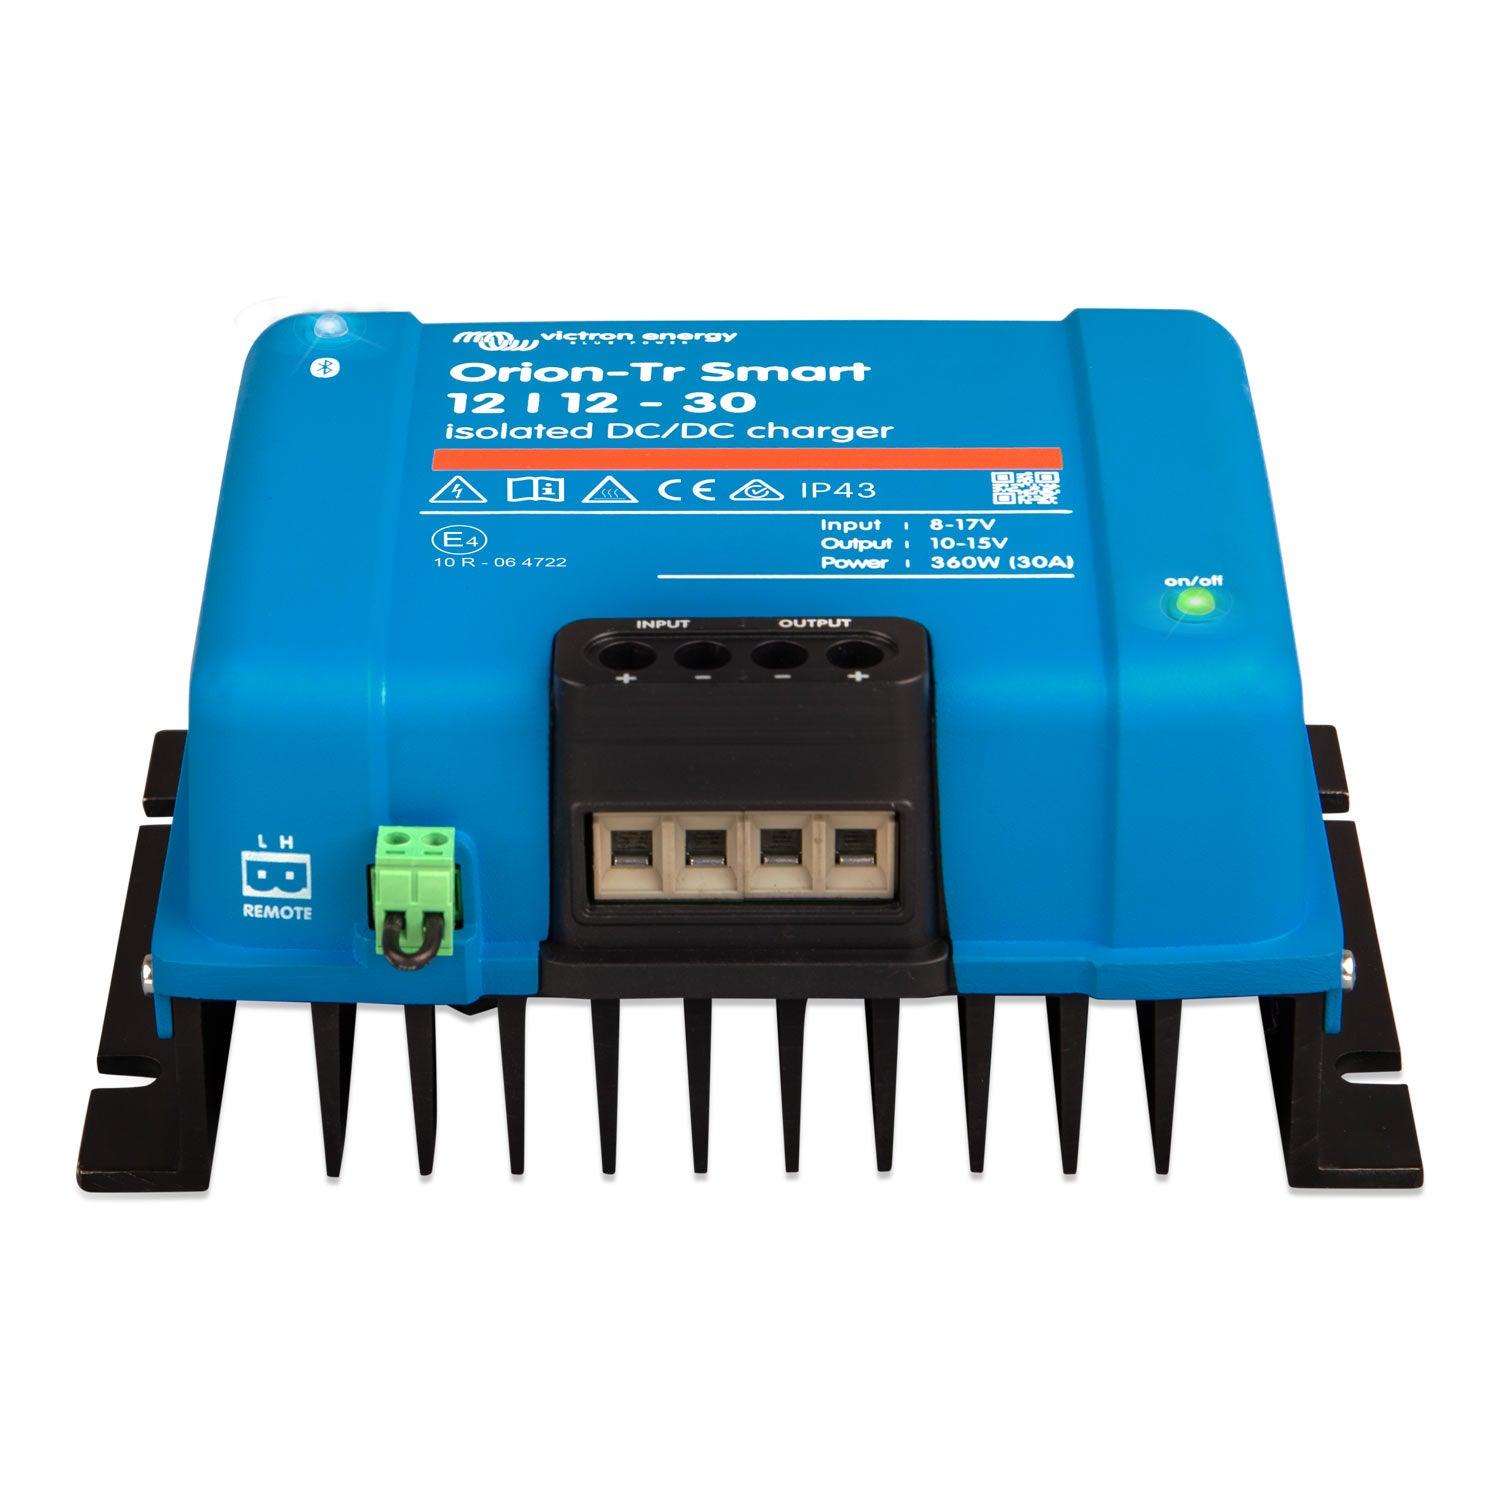 Victron Orion-Tr Smart 12/12-30A (360W) Isolated DC-DC Charger - ORI121236120 - VoltaconSolar